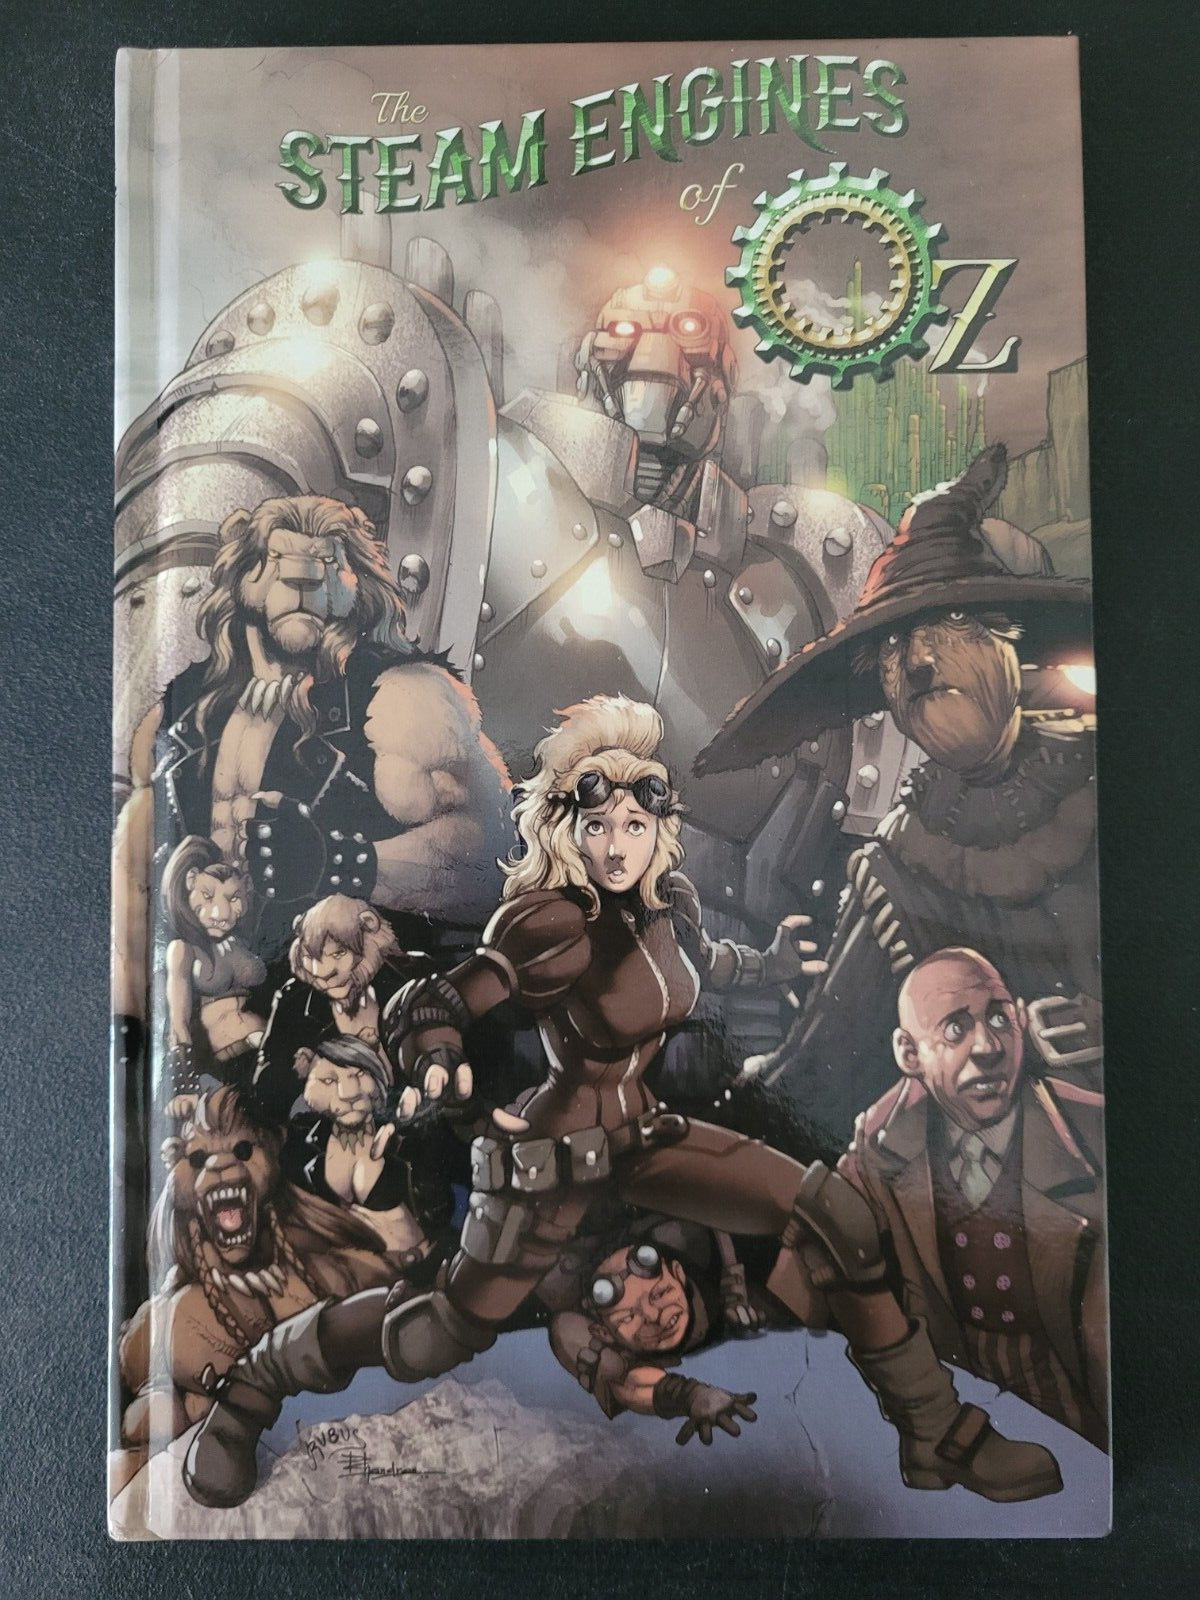 THE STEAM ENGINES OF OZ HARDCOVER EDITION GRAPHIC NOVEL 2014 Arcana Studios